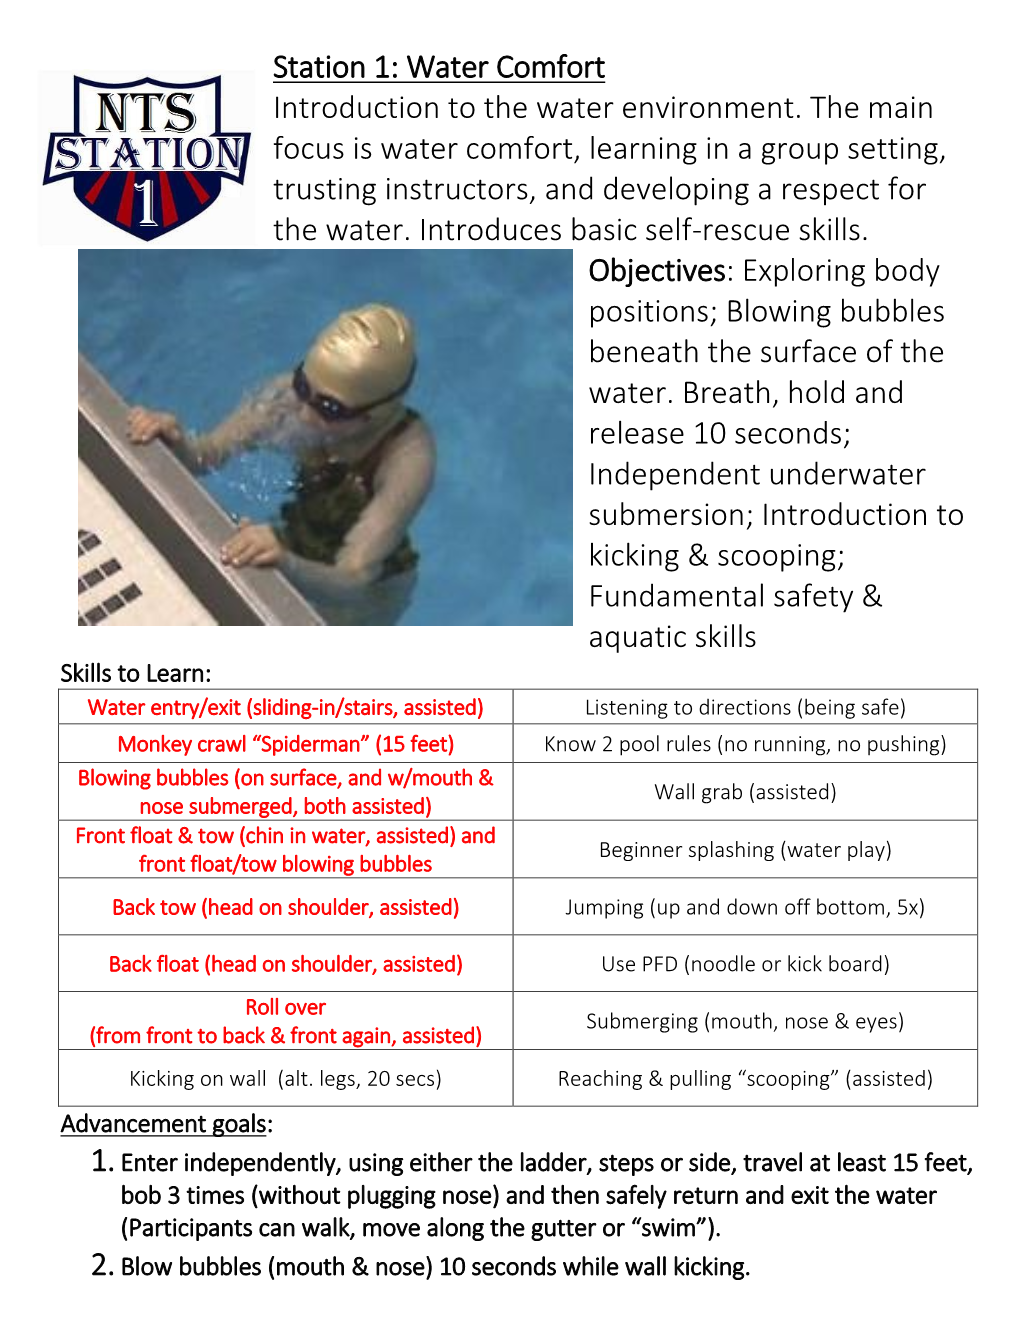 Station 1: Water Comfort Introduction to the Water Environment. the Main